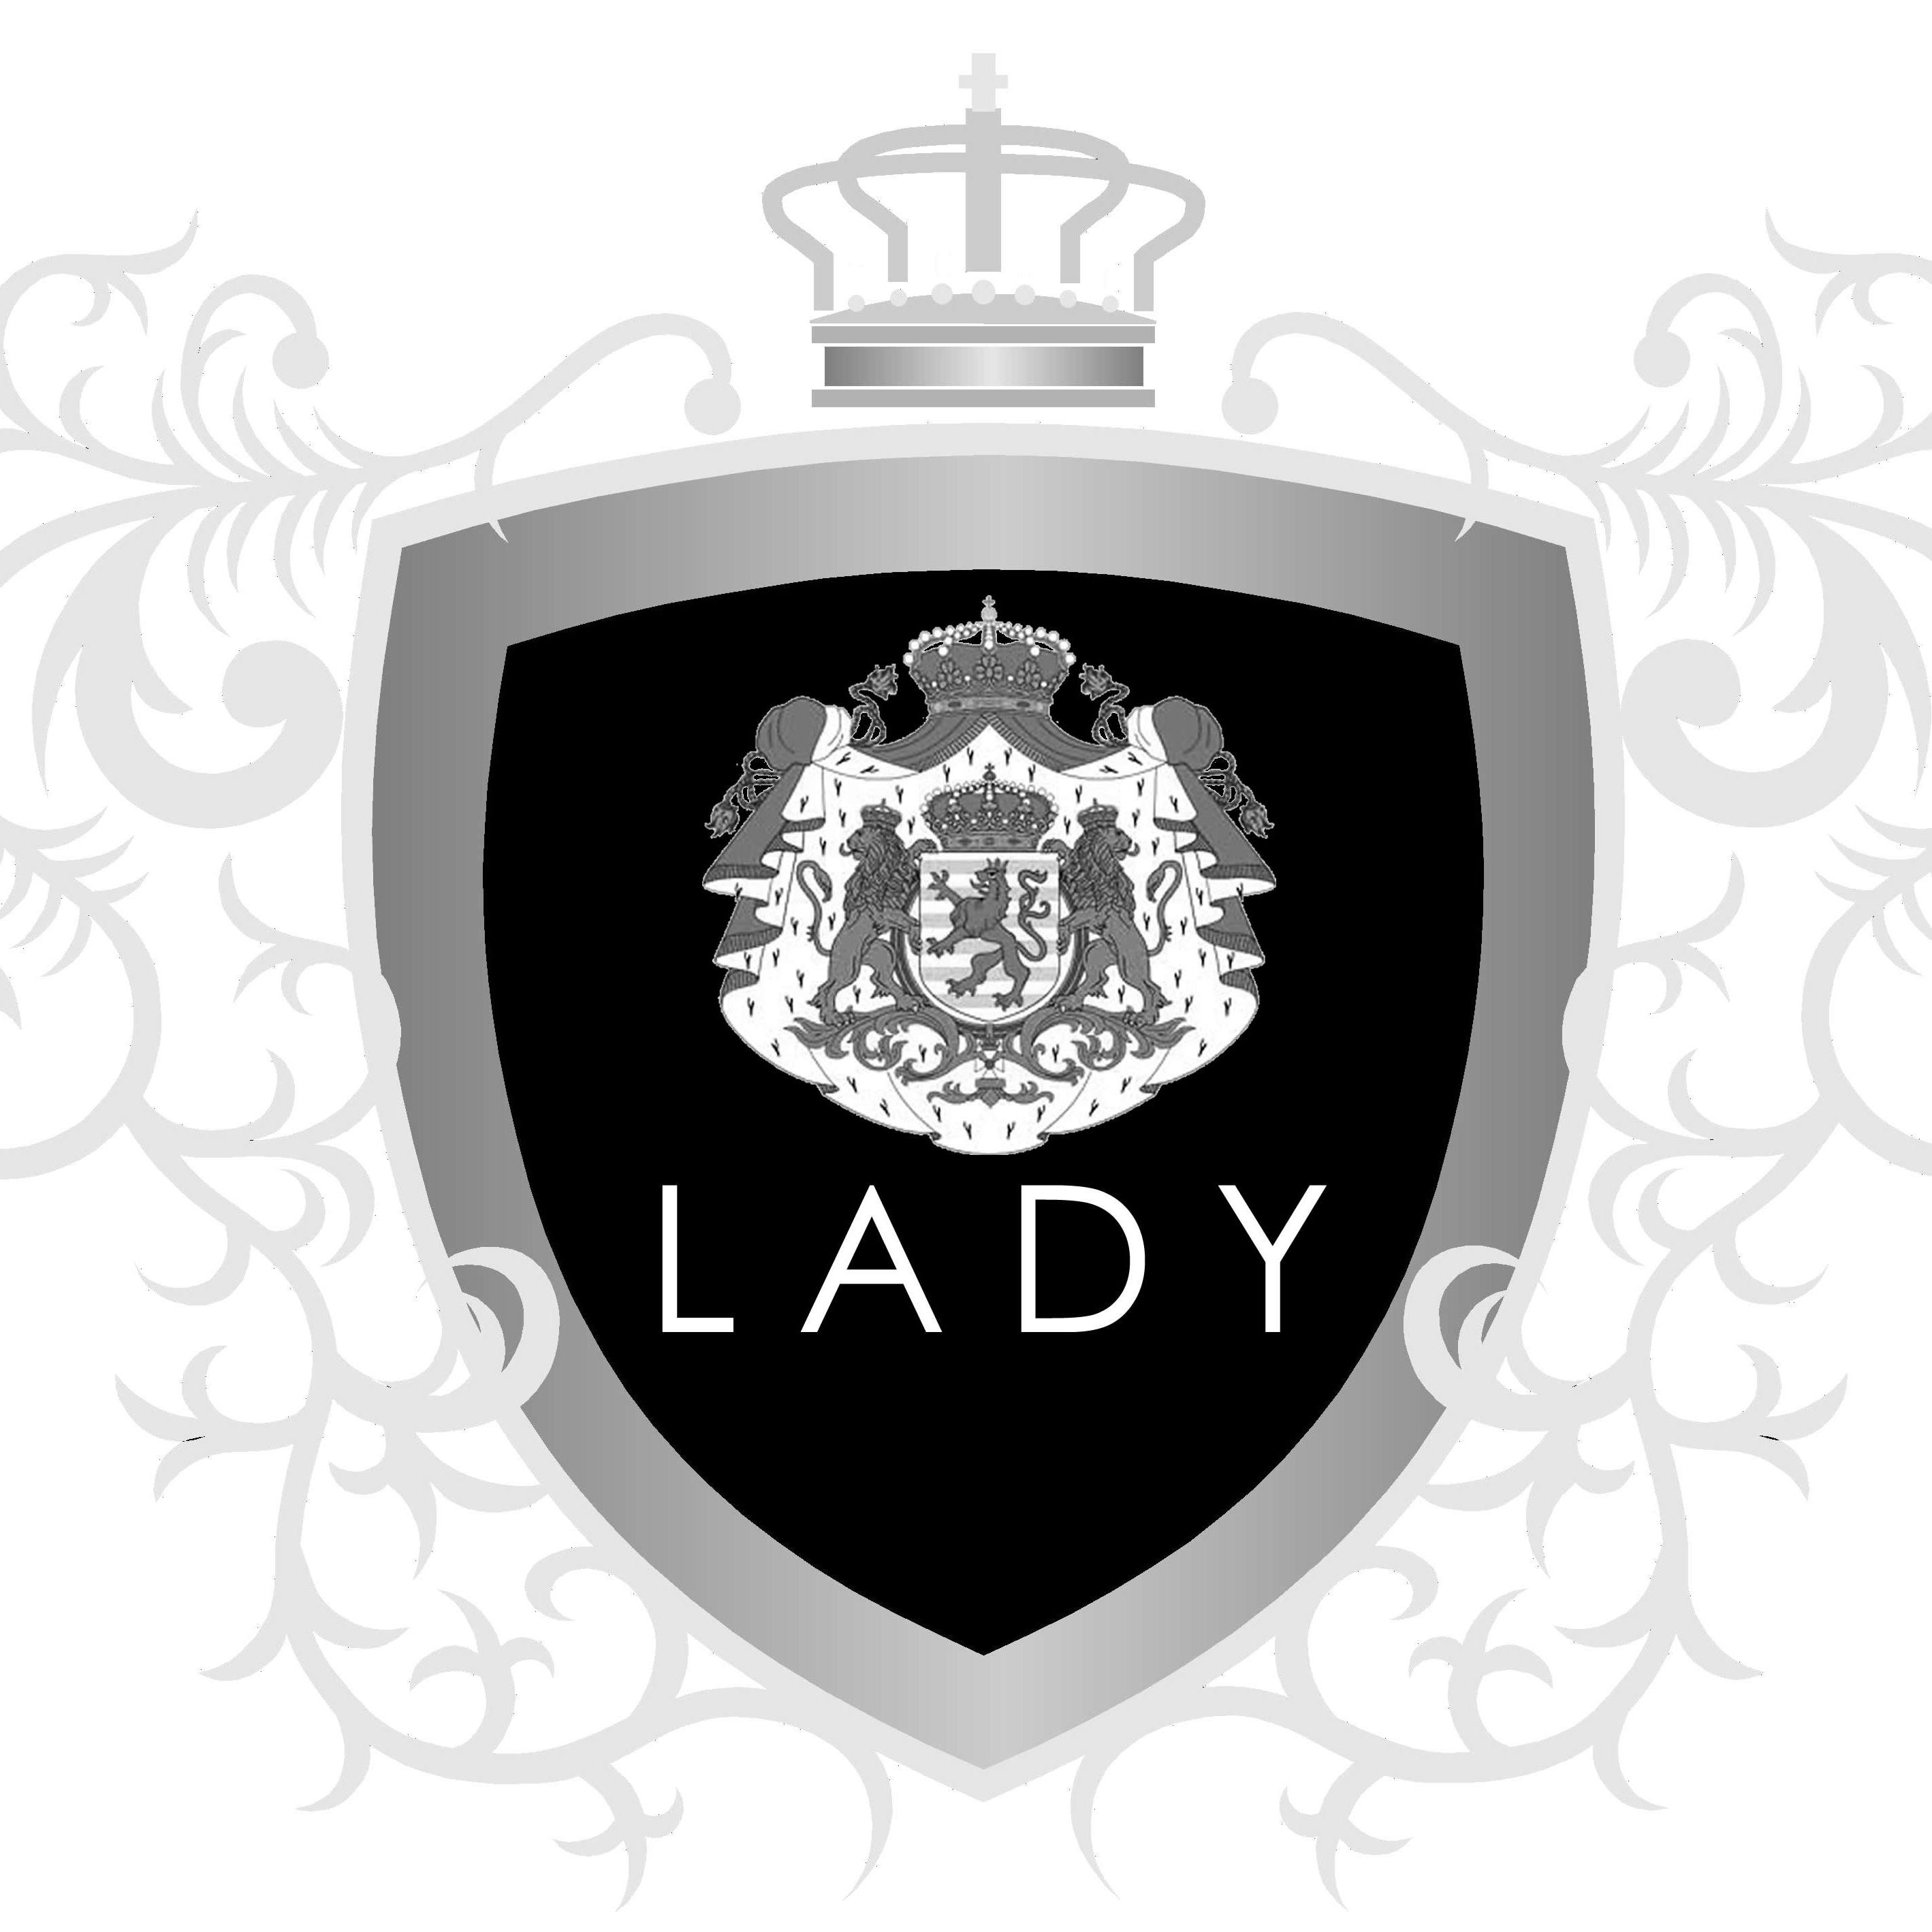 Welcome to the Official Twitter of LADY Ladieswear Store in Clitheroe.  Retailer of Labek, Poppy, Sommerman and seller of Ladies clothing, handbags and more!